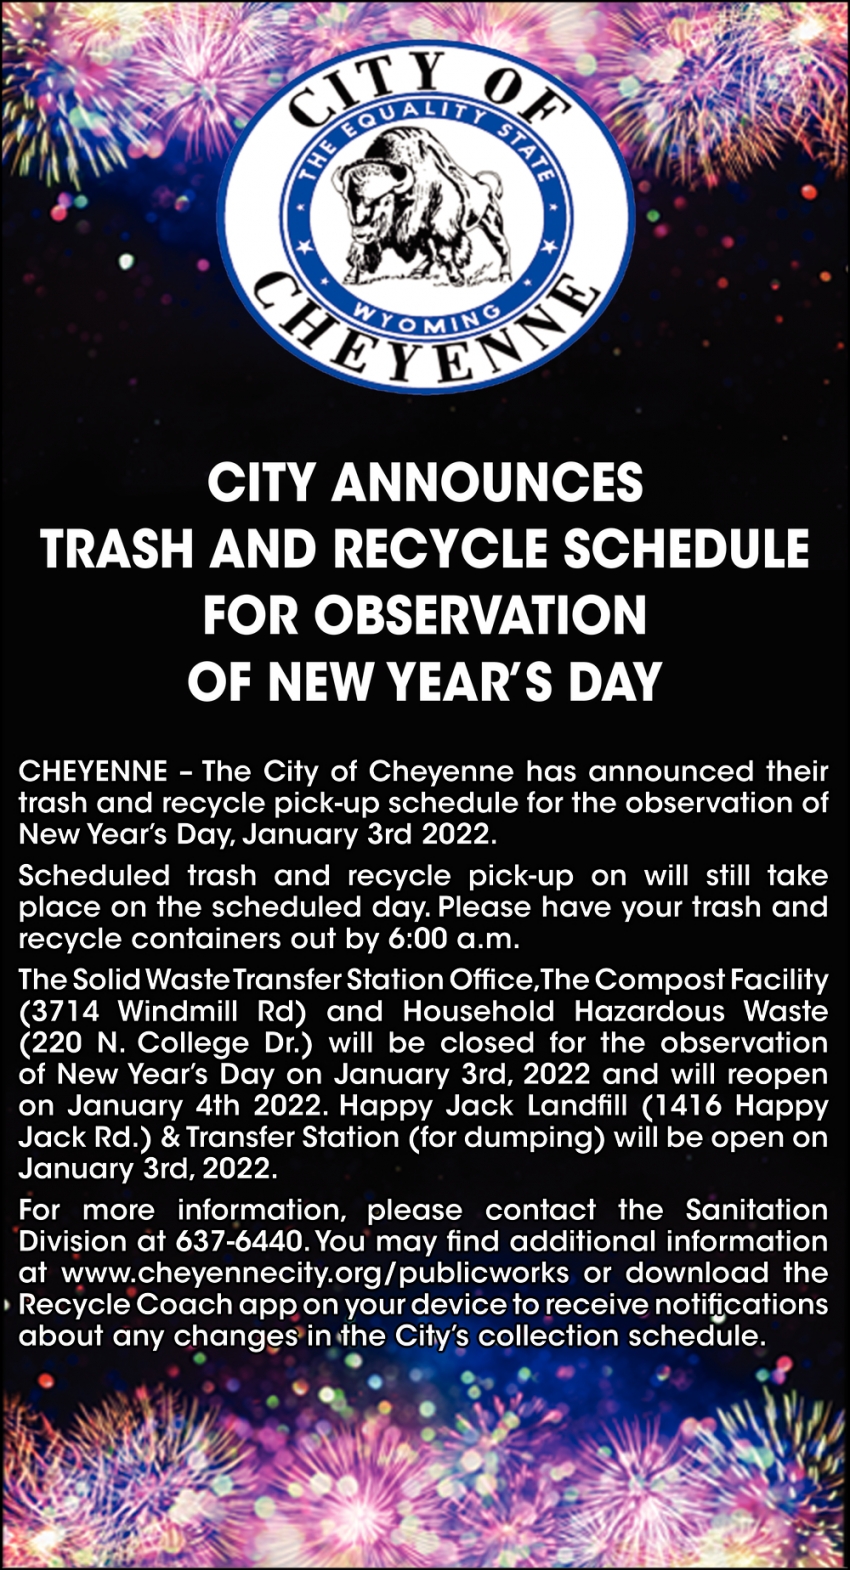 City Announces Trash and Recycle Schedule for Columbus Day